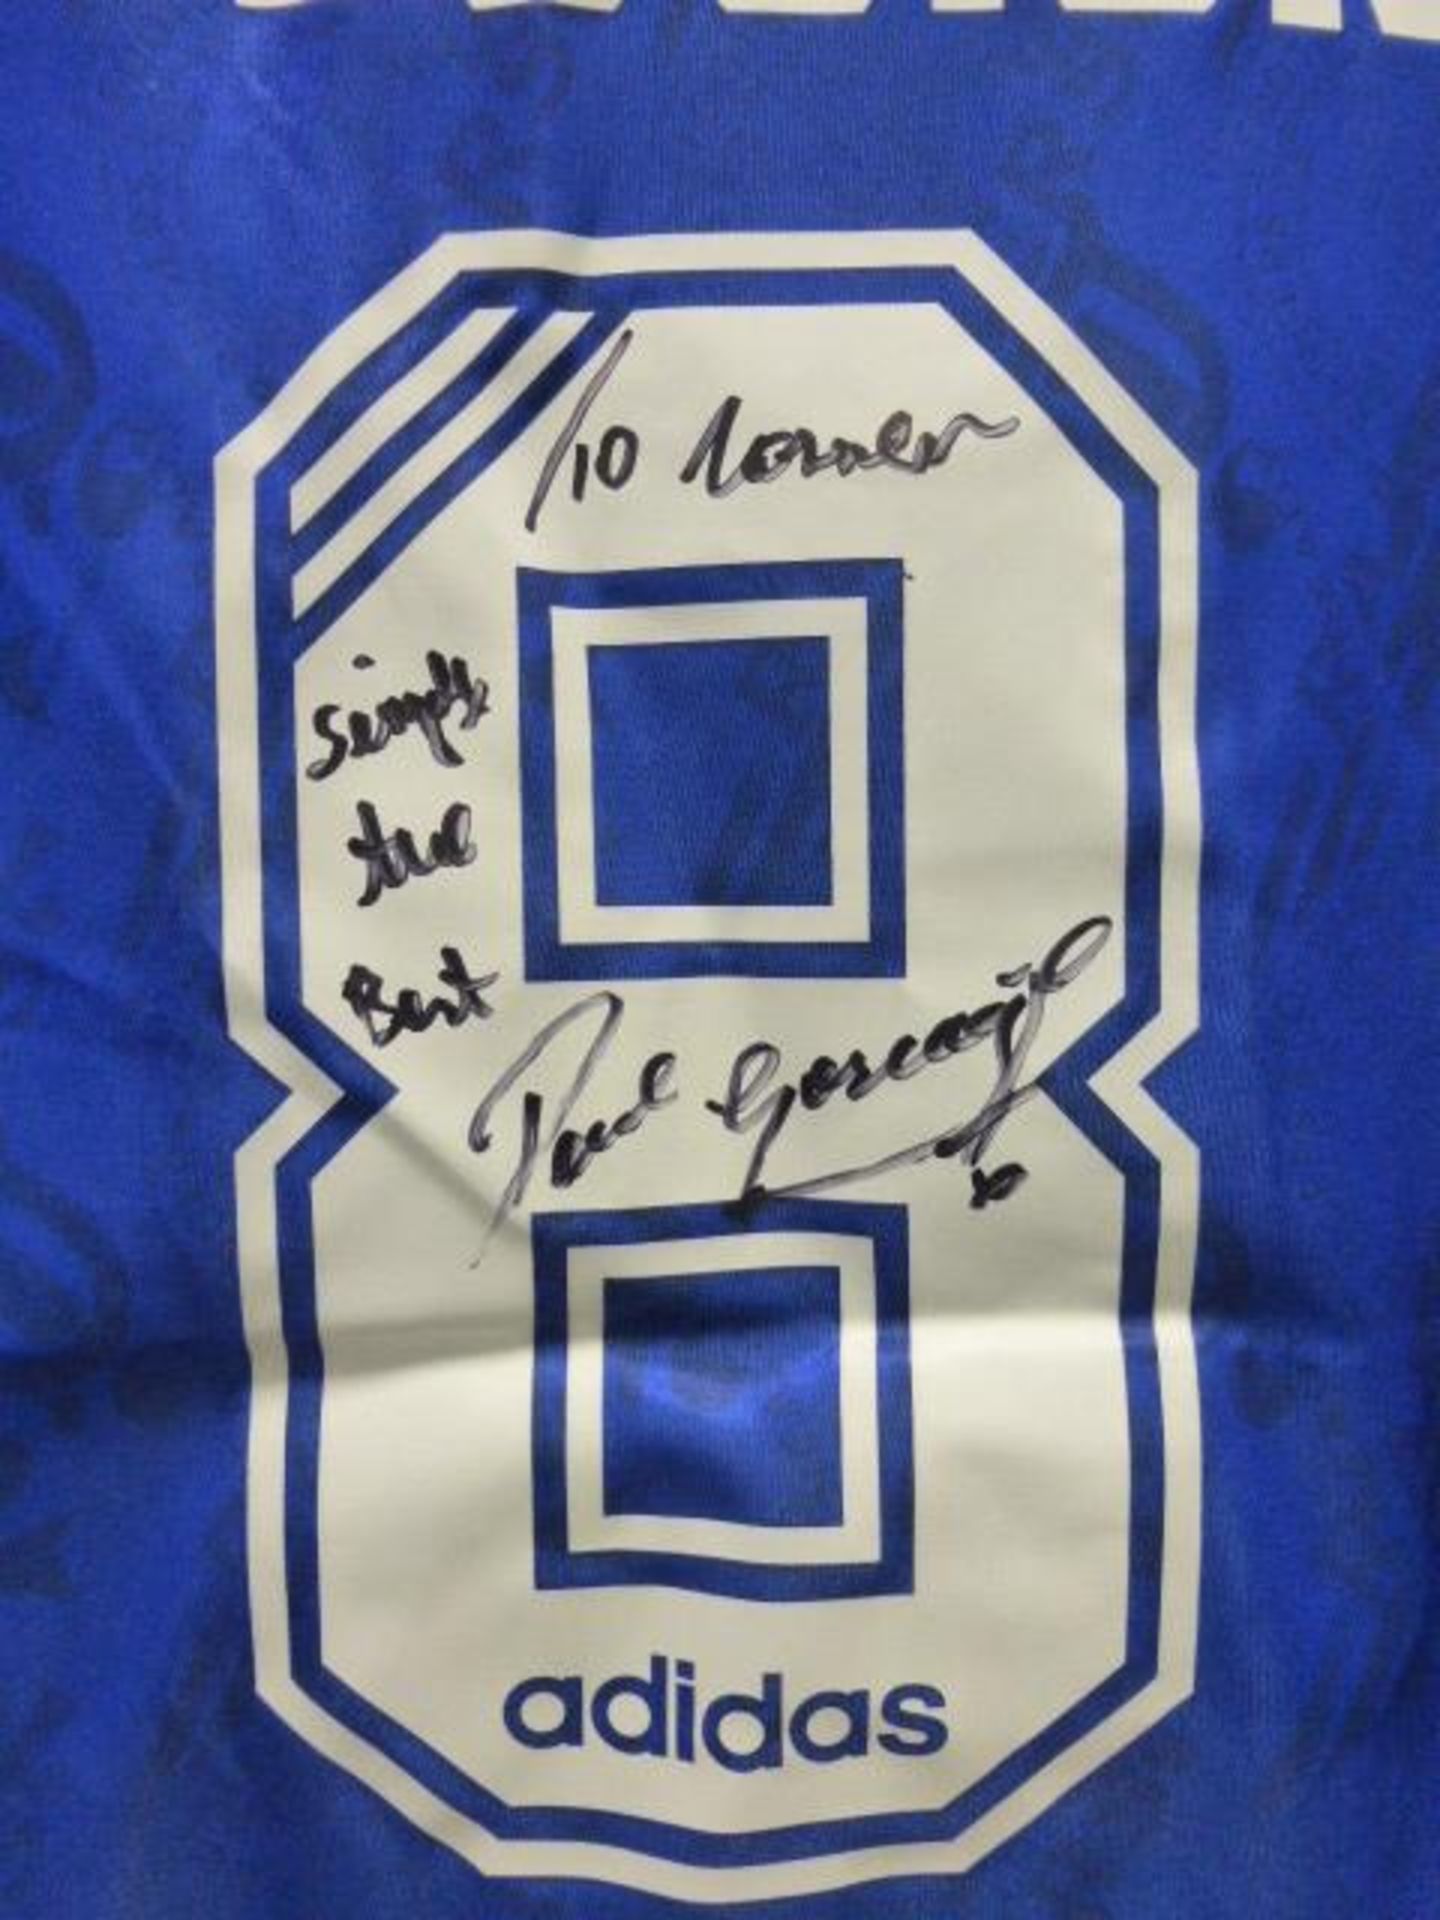 Adidas Rangers t-shirt bearing the name Paul Gascoigne with personal message (signed, unverified) - Image 3 of 3